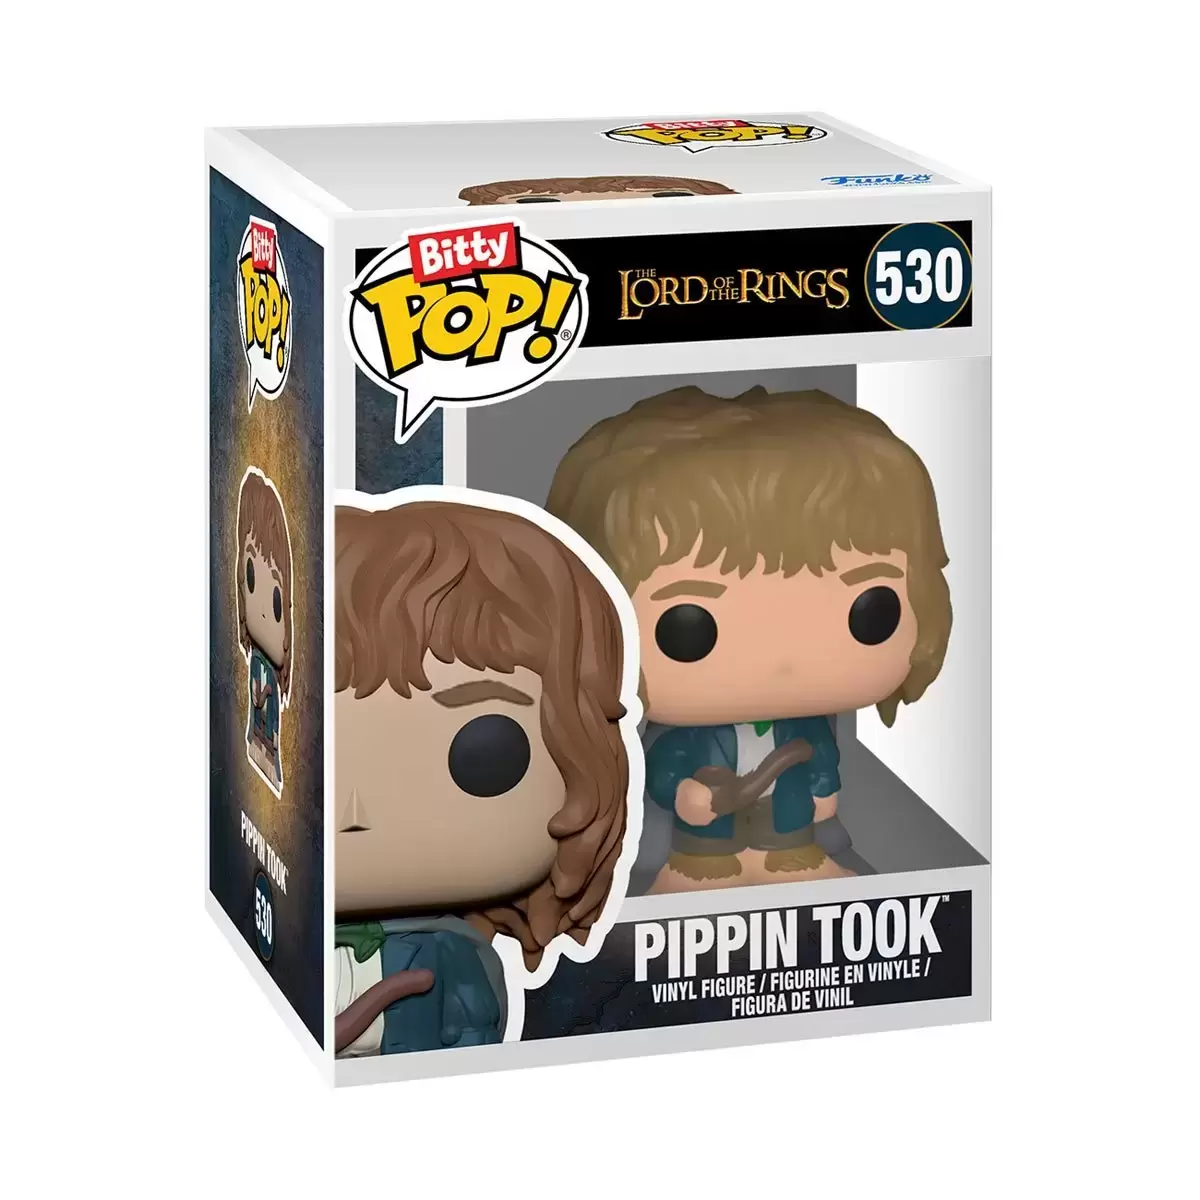 Bitty POP! - Lord of The Rings - Pippin Took